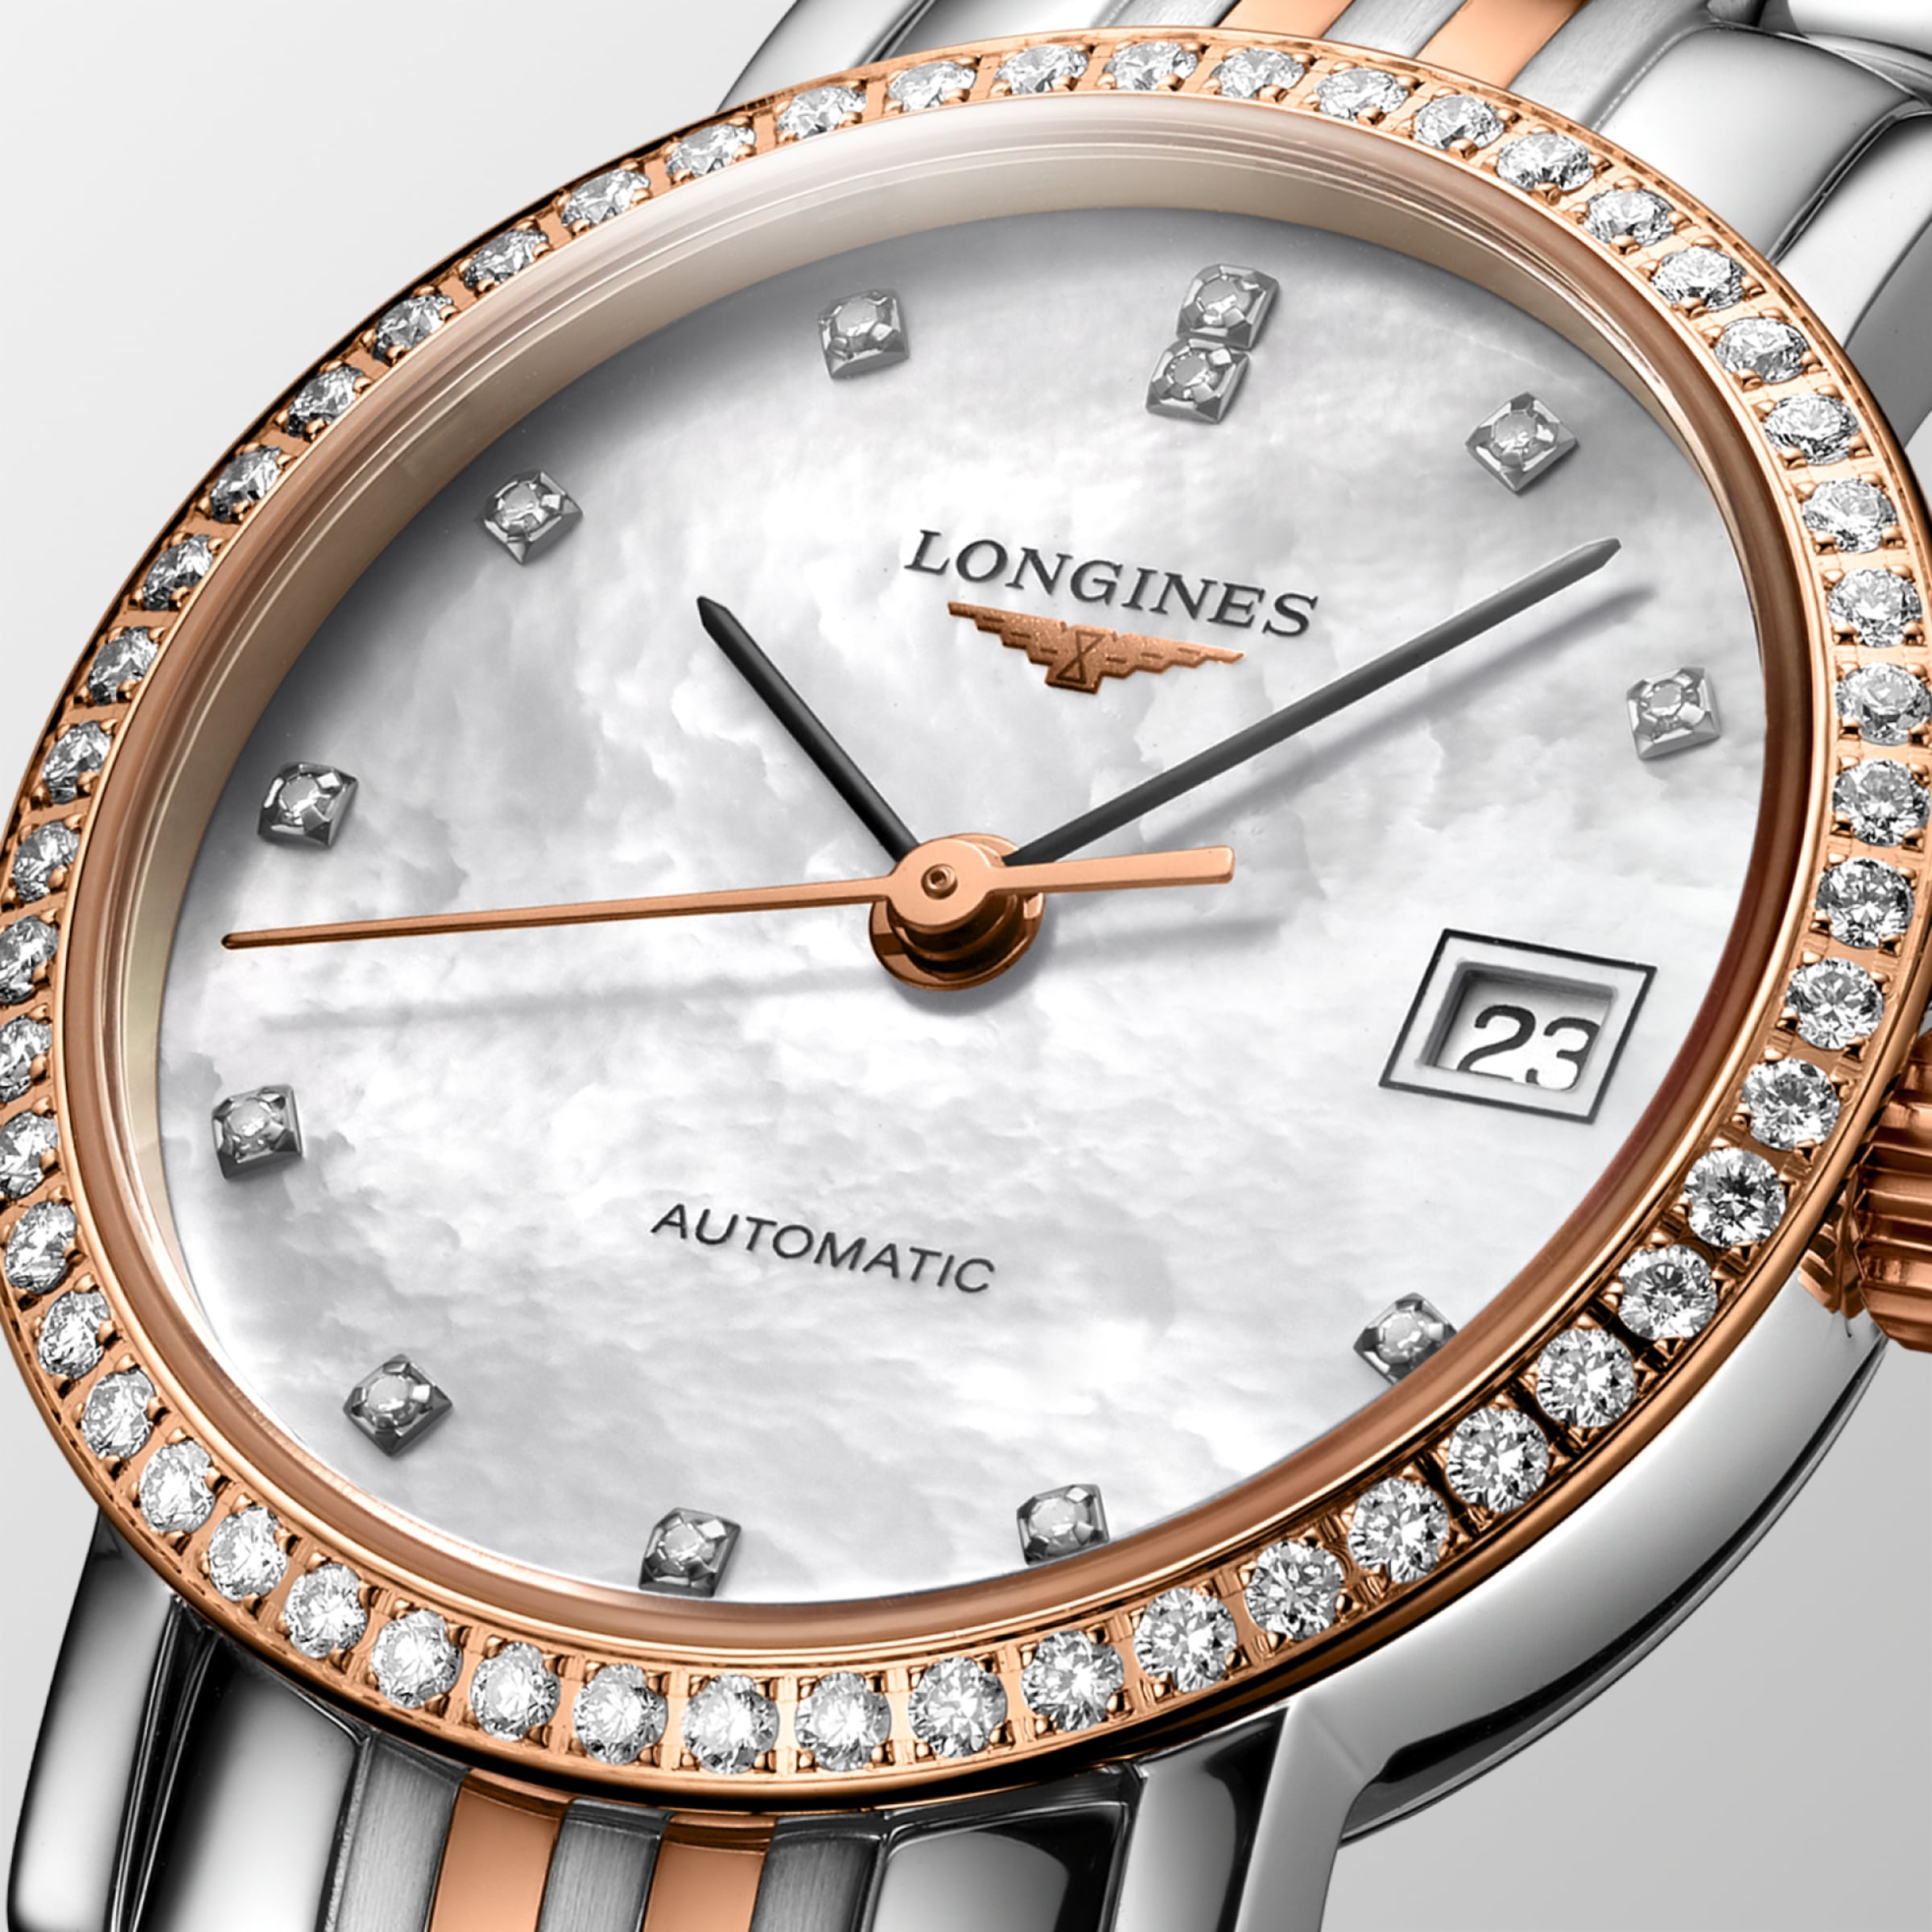 Longines ELEGANT COLLECTION Automatic Stainless steel and 18 karat pink gold Watch - L4.309.5.88.7